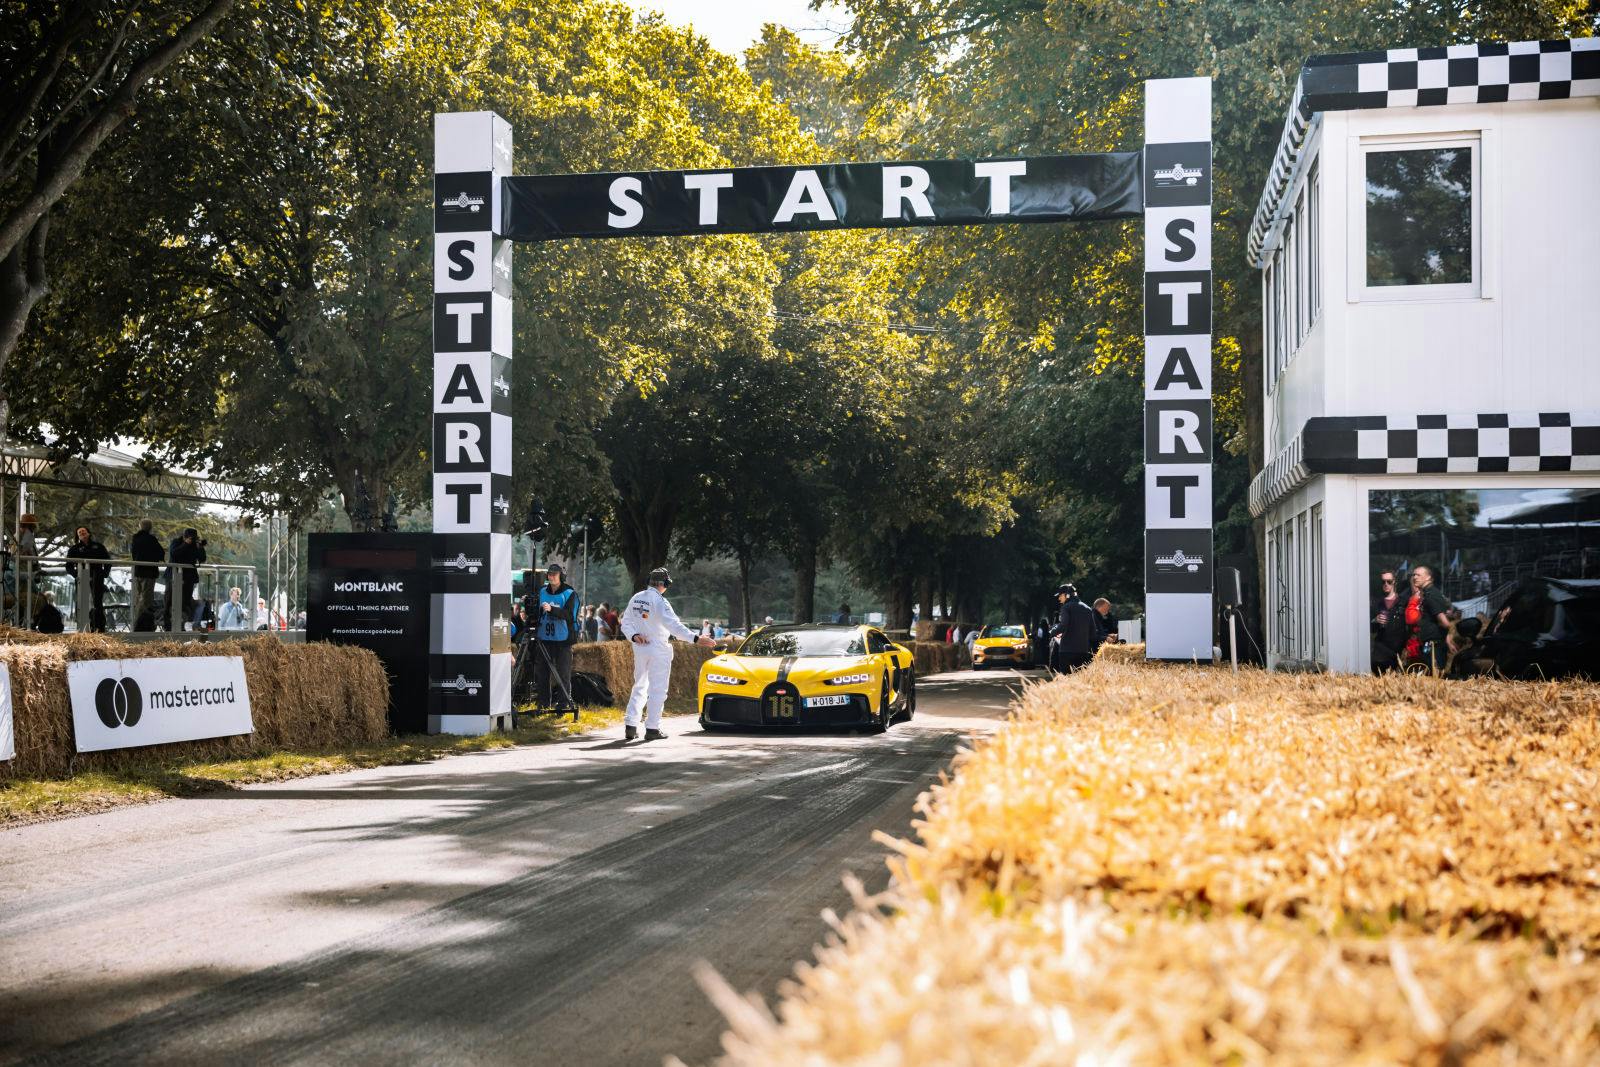 The Bugatti Chiron Pur Sport about to provide with a glimpse of what it is capable of on the 1.86km of the Hill Climb at Goodwood Festival of Speed 2021.